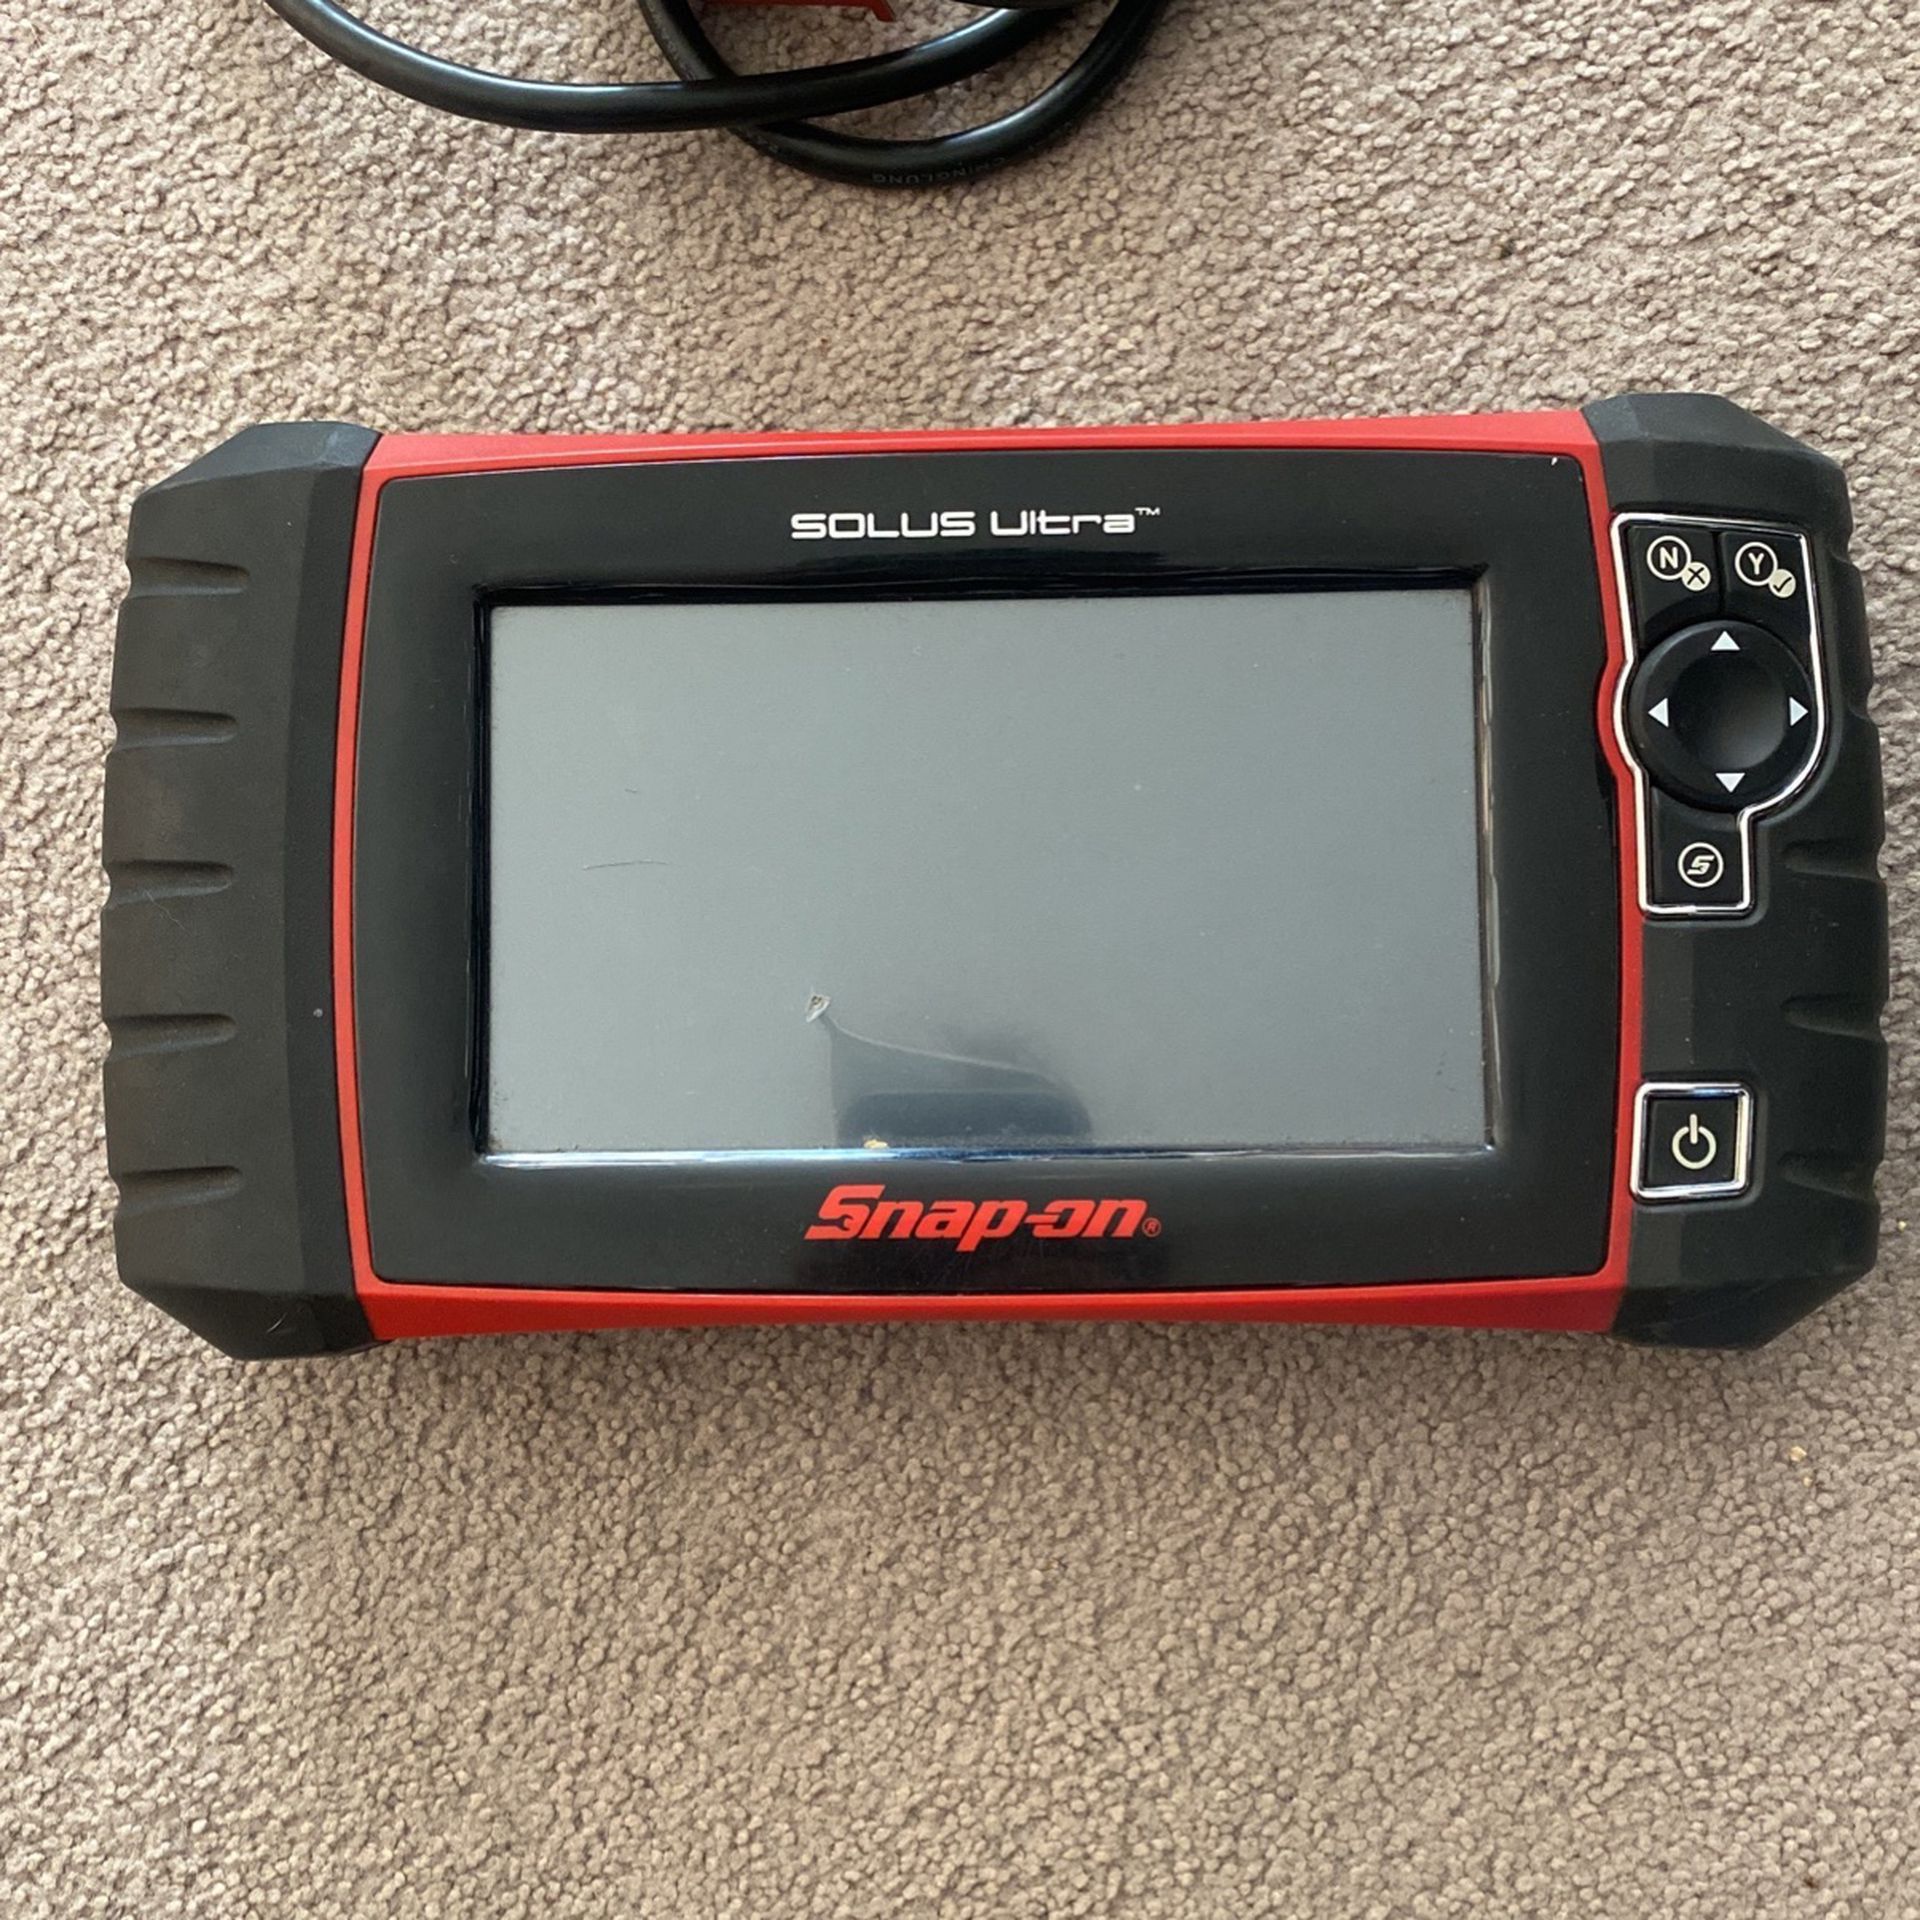 SNAP-ON SOLUS ULTRA Programmed As 13.4